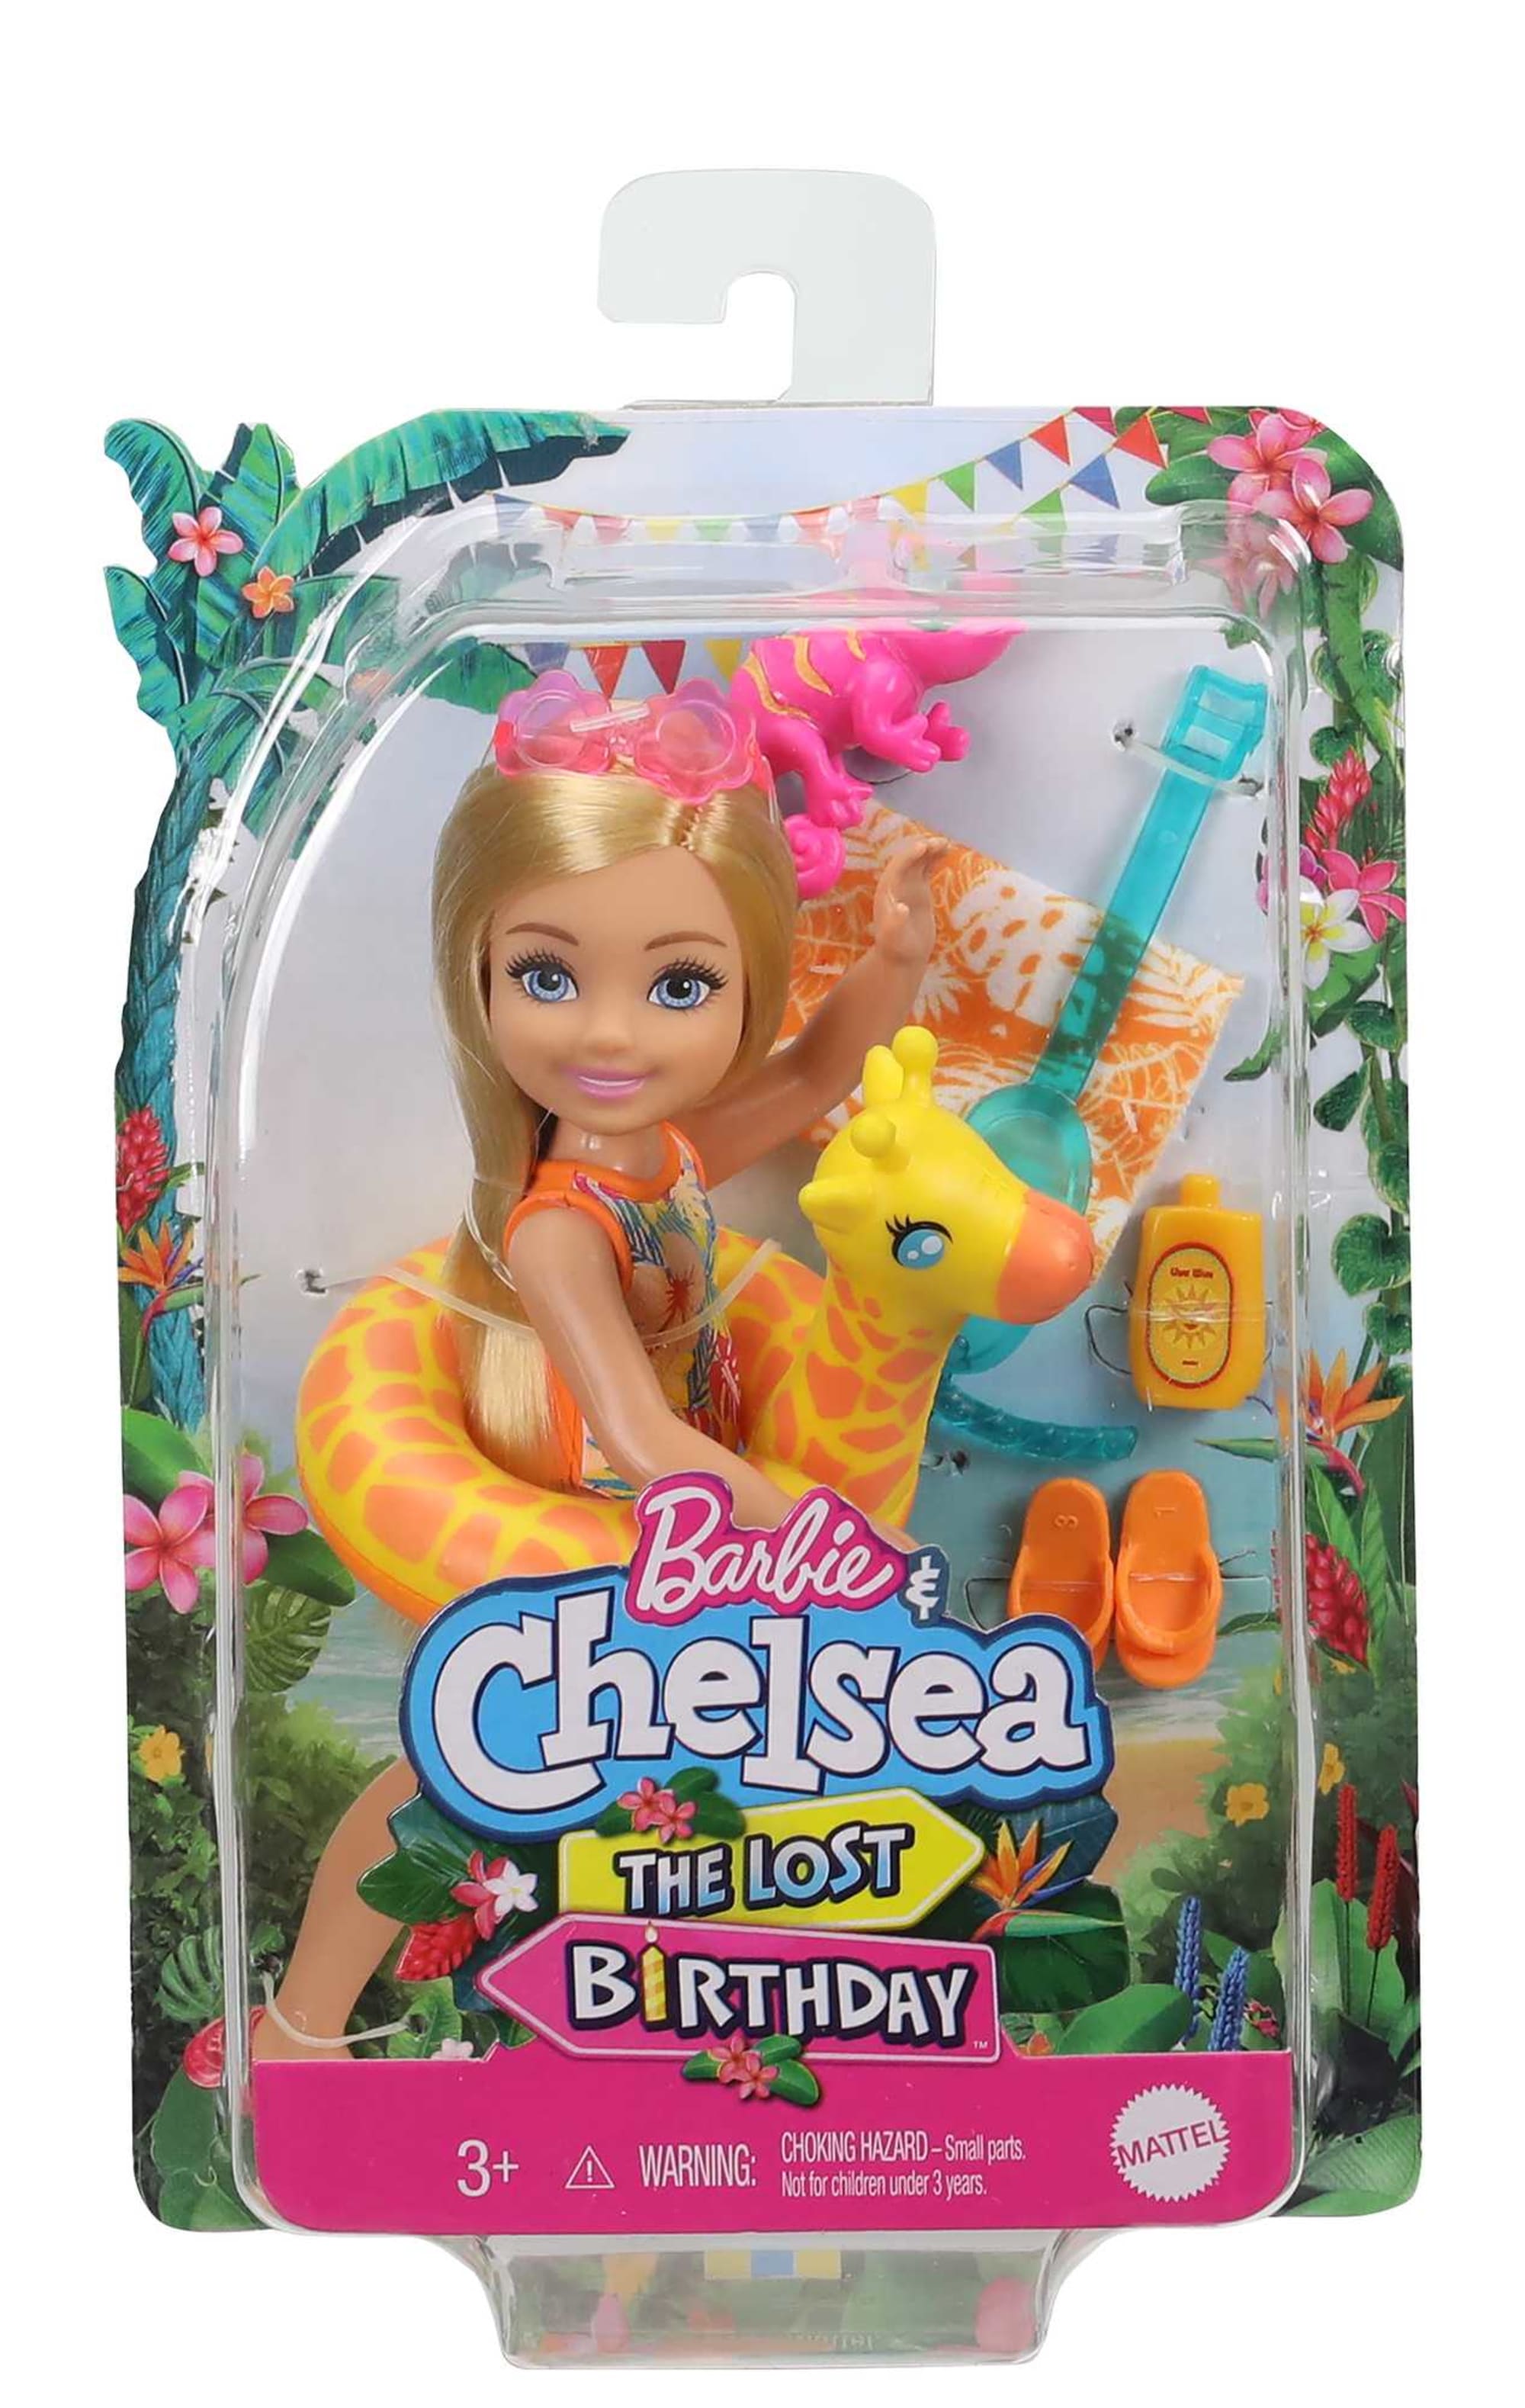 Barbie And Chelsea The Lost Birthday Doll And Accessories